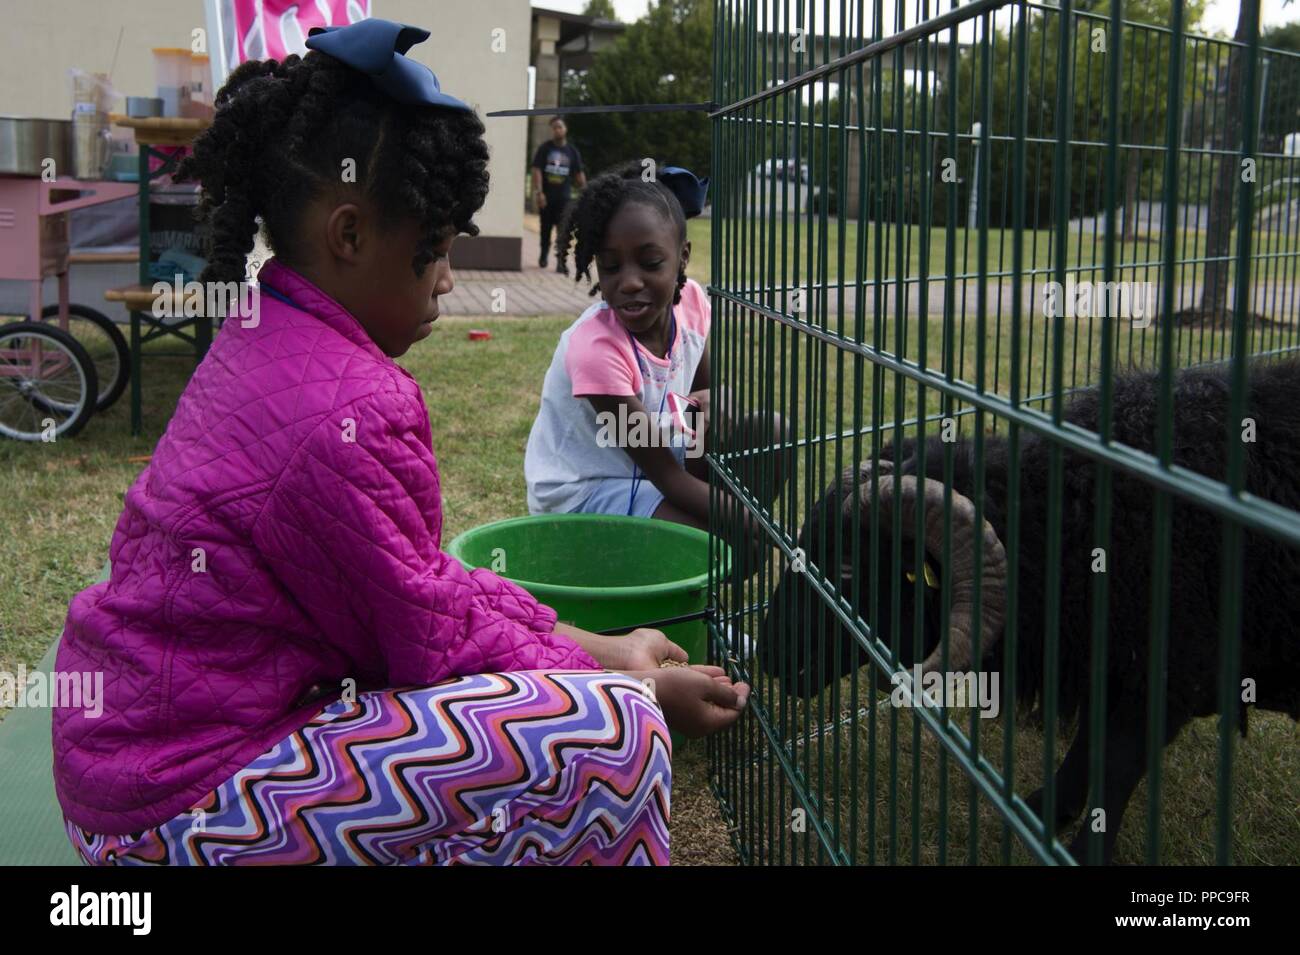 Ysabelle Thermidor, left, and Kayla Thermidor, right, children of Tech. Sgt. Melanie Thermidor, Equal Opportunity Office non-commissioned officer in charge, feed sheep at Spangdahlem Air Base, Germany, Aug. 17, 2018 during Multicultural Awareness day events. The event also featured an owl and a pettable bull. Stock Photo